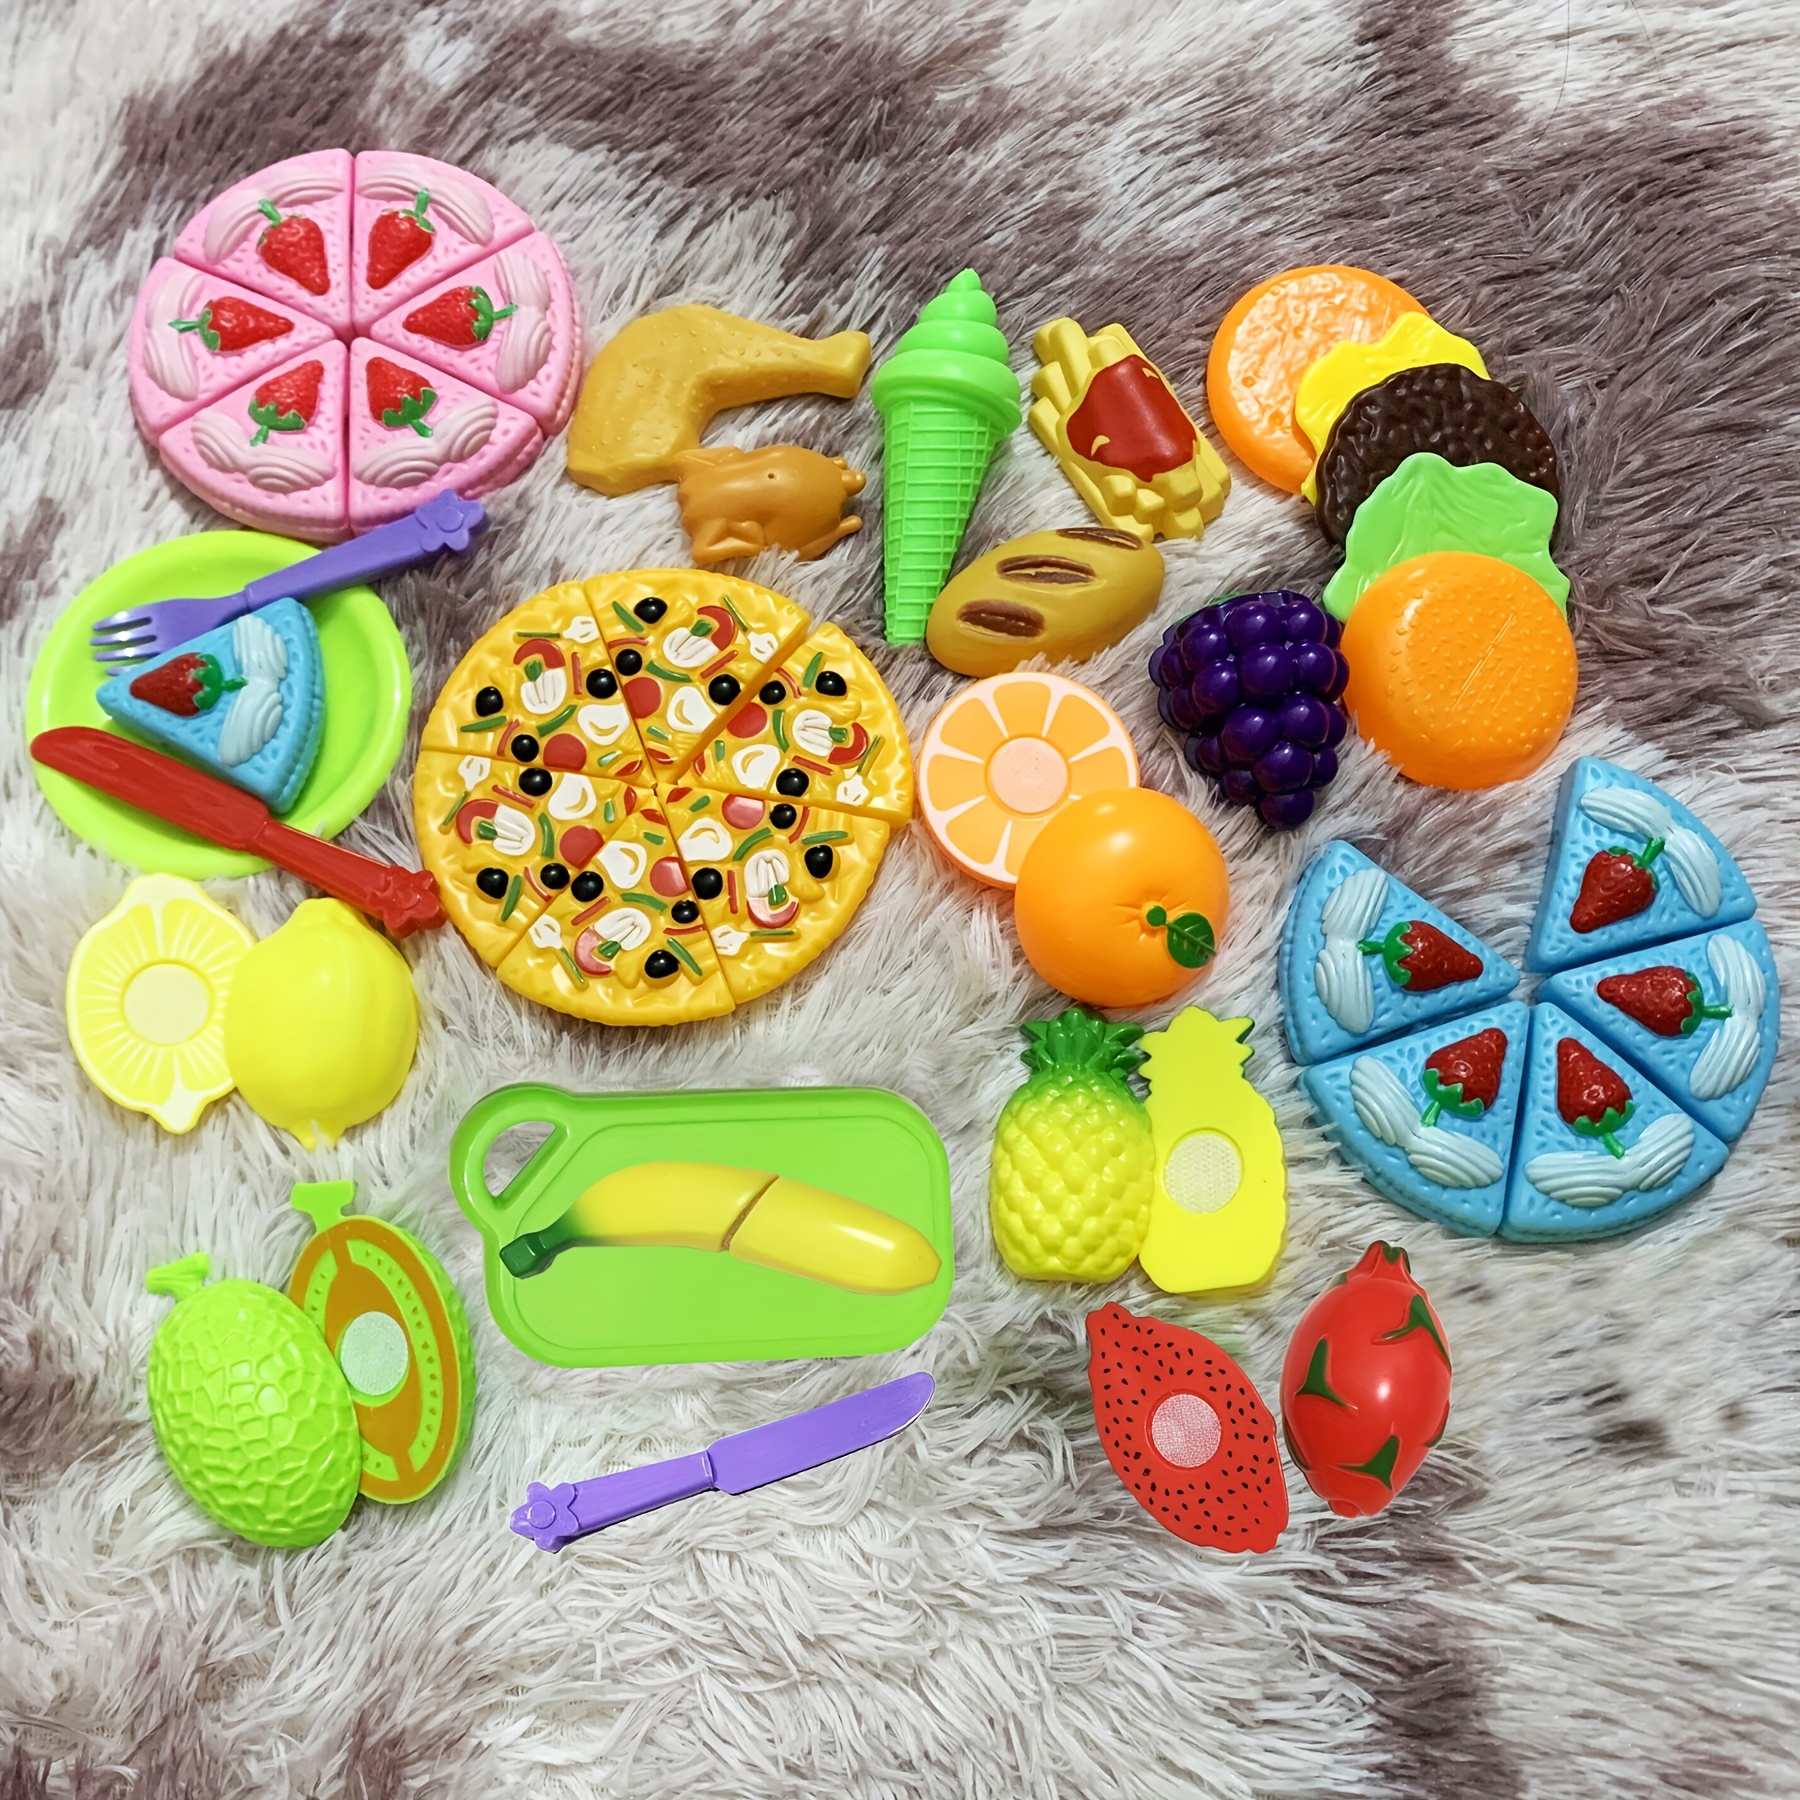 Children Pizza Toy Set Pretend Play Game Simulation Food for Birthday Gifts